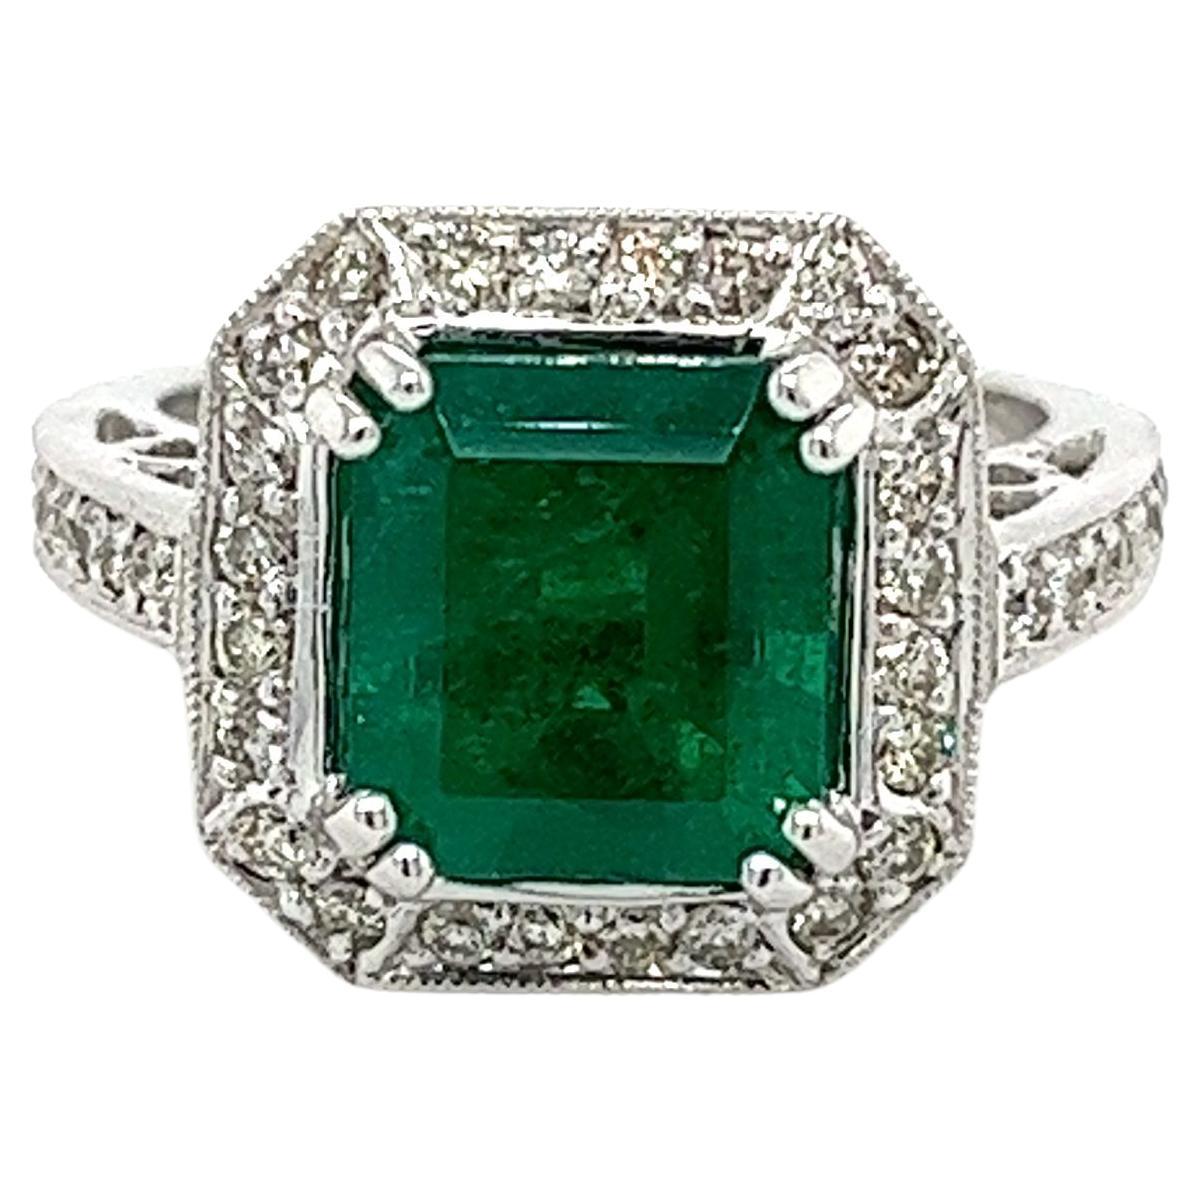 3 Carat Colombian Emerald in 18K White Gold Ring & Round Cut Diamond Halo